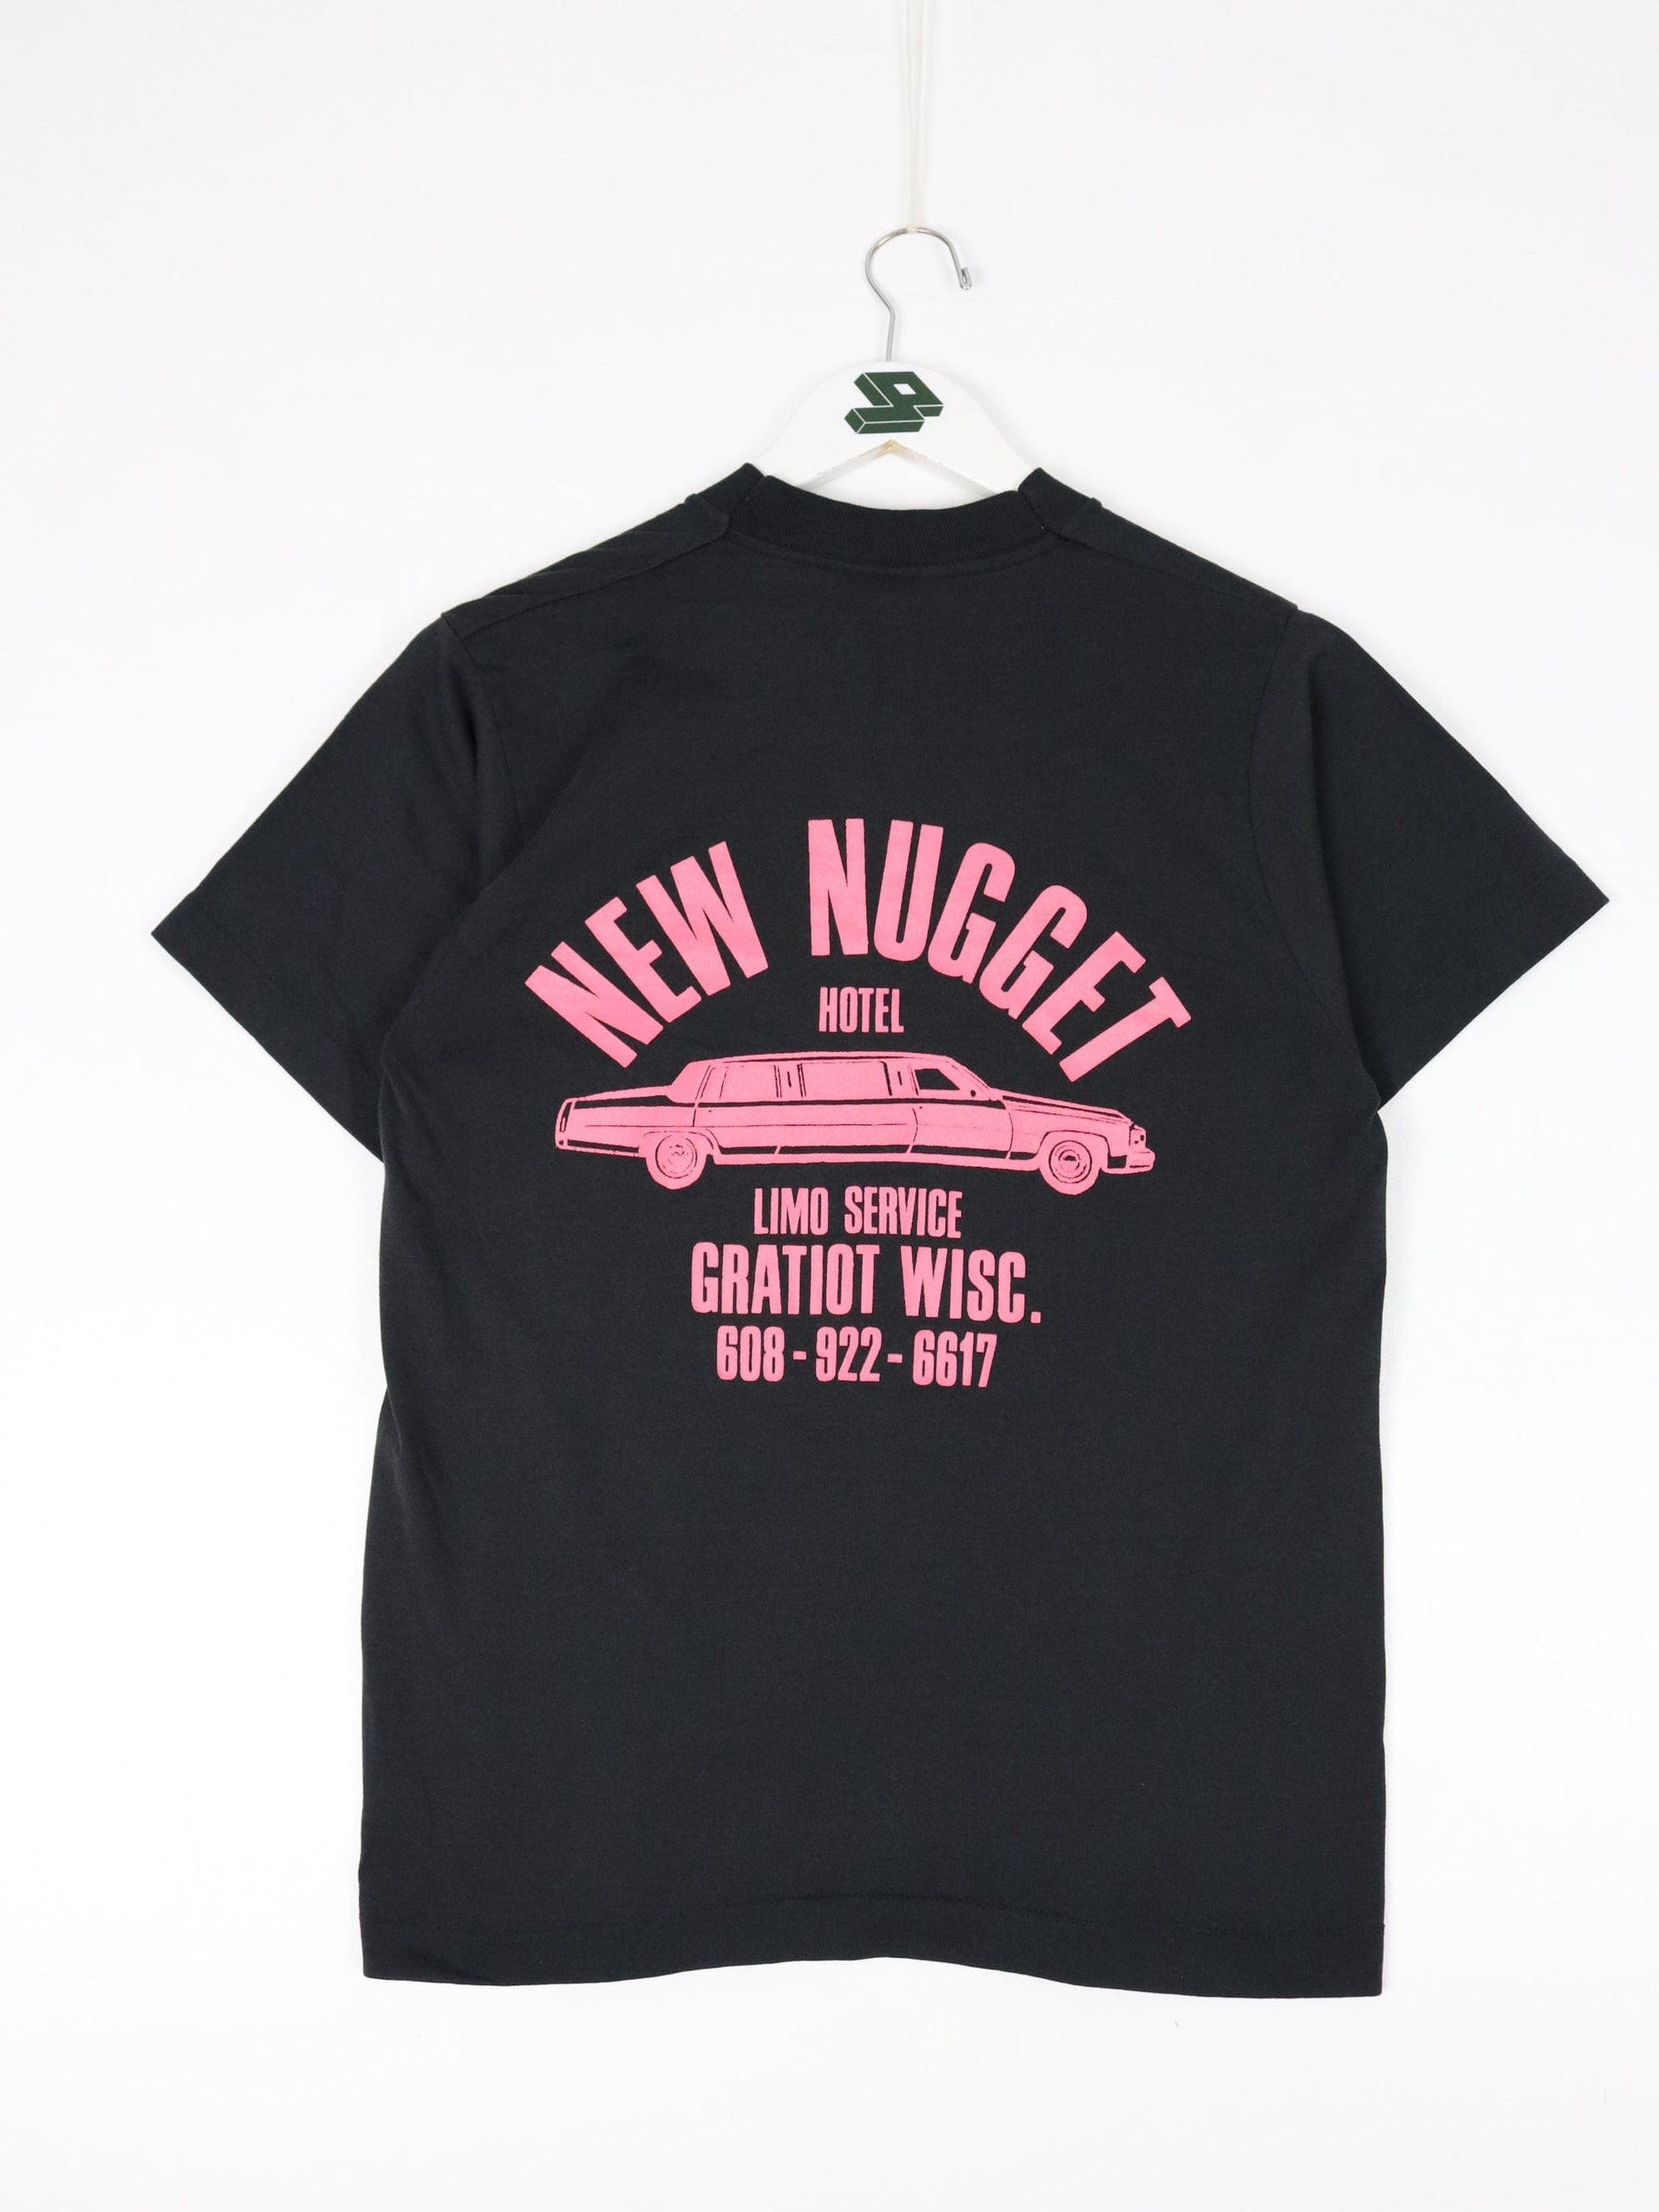 Other T-Shirts & Tank Tops Vintage New Nugget Hotel T Shirt Mens Medium Black Limo 90s